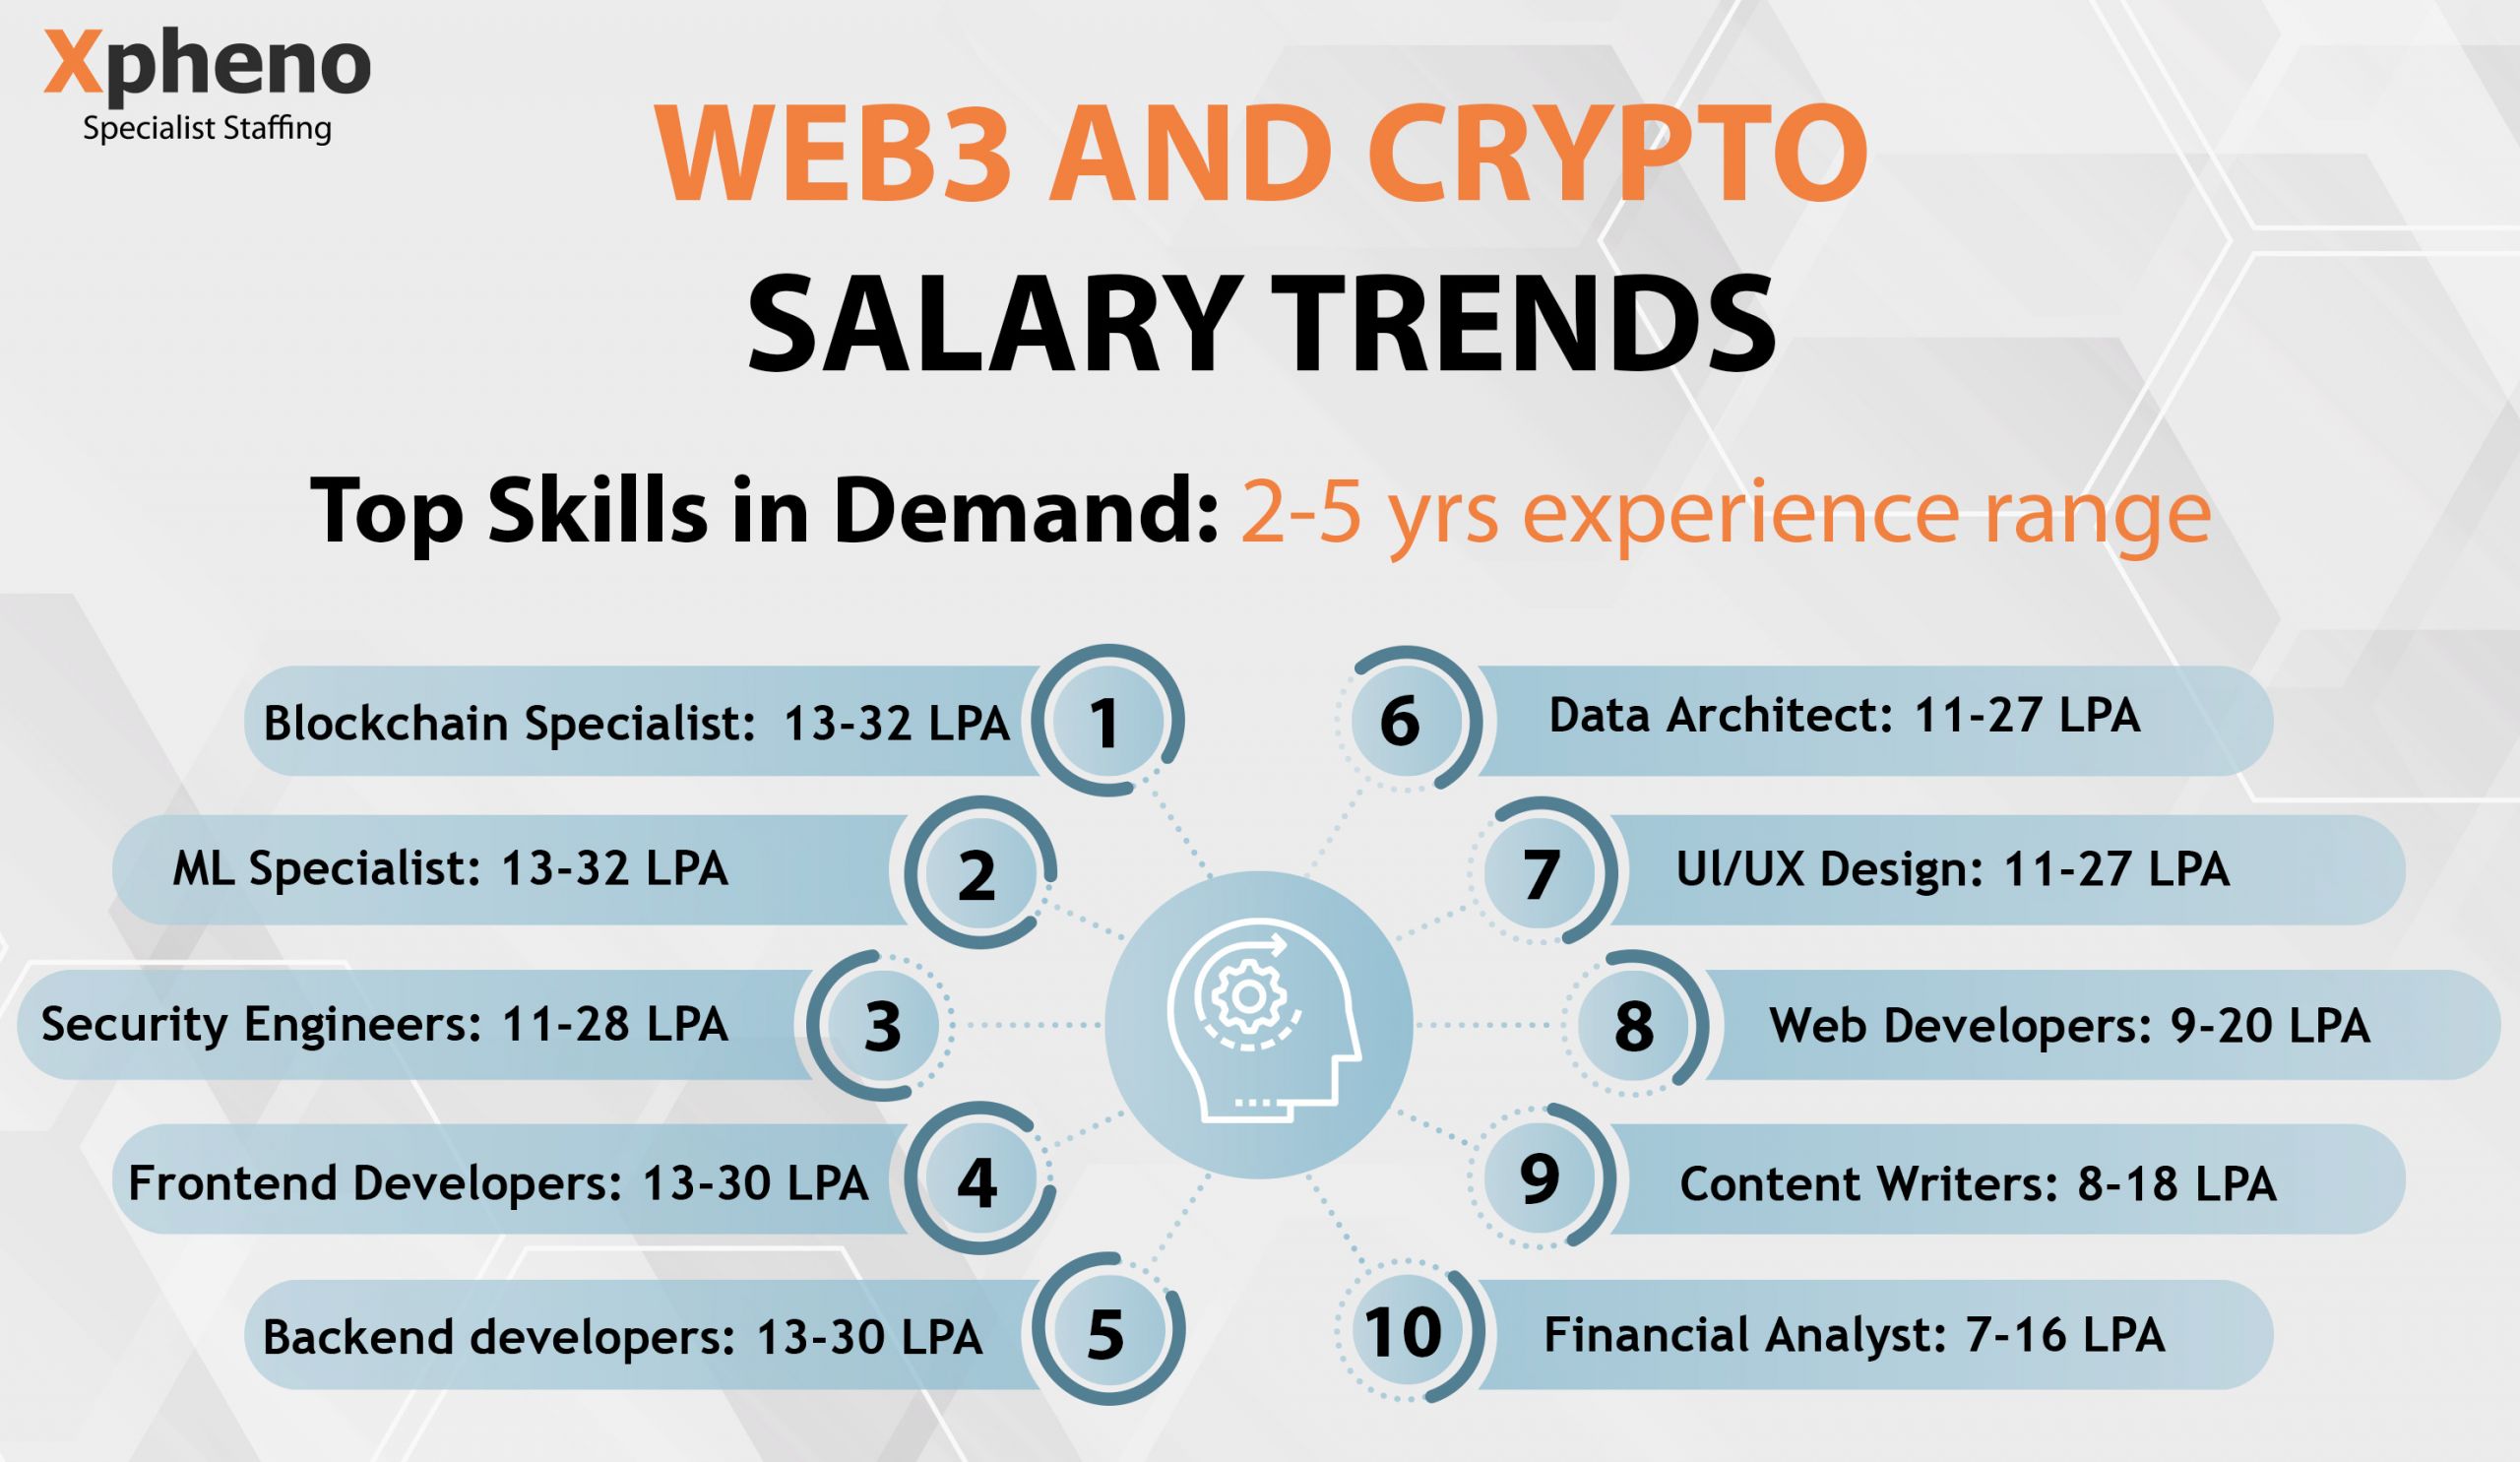 Web 3 and Crypto Salary trends